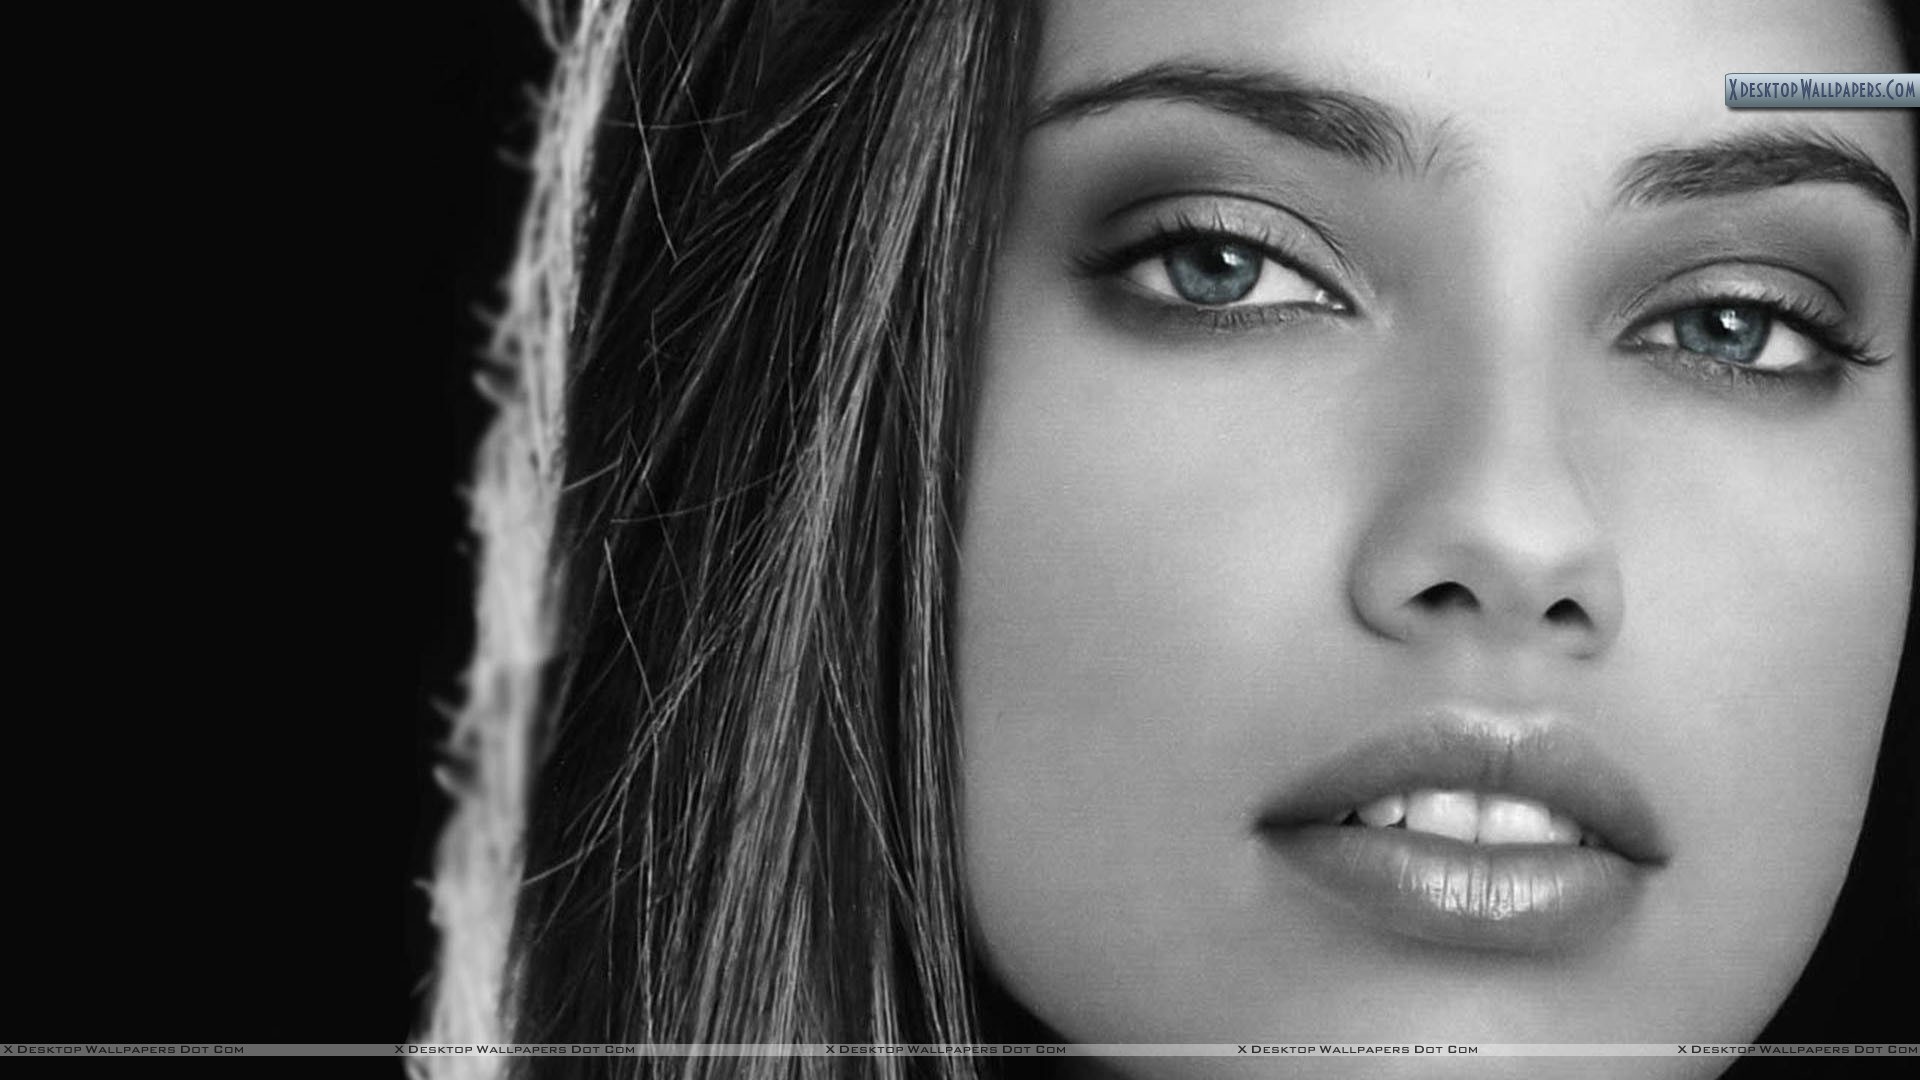 1920x1080 You are viewing wallpaper titled "Adriana Lima ...